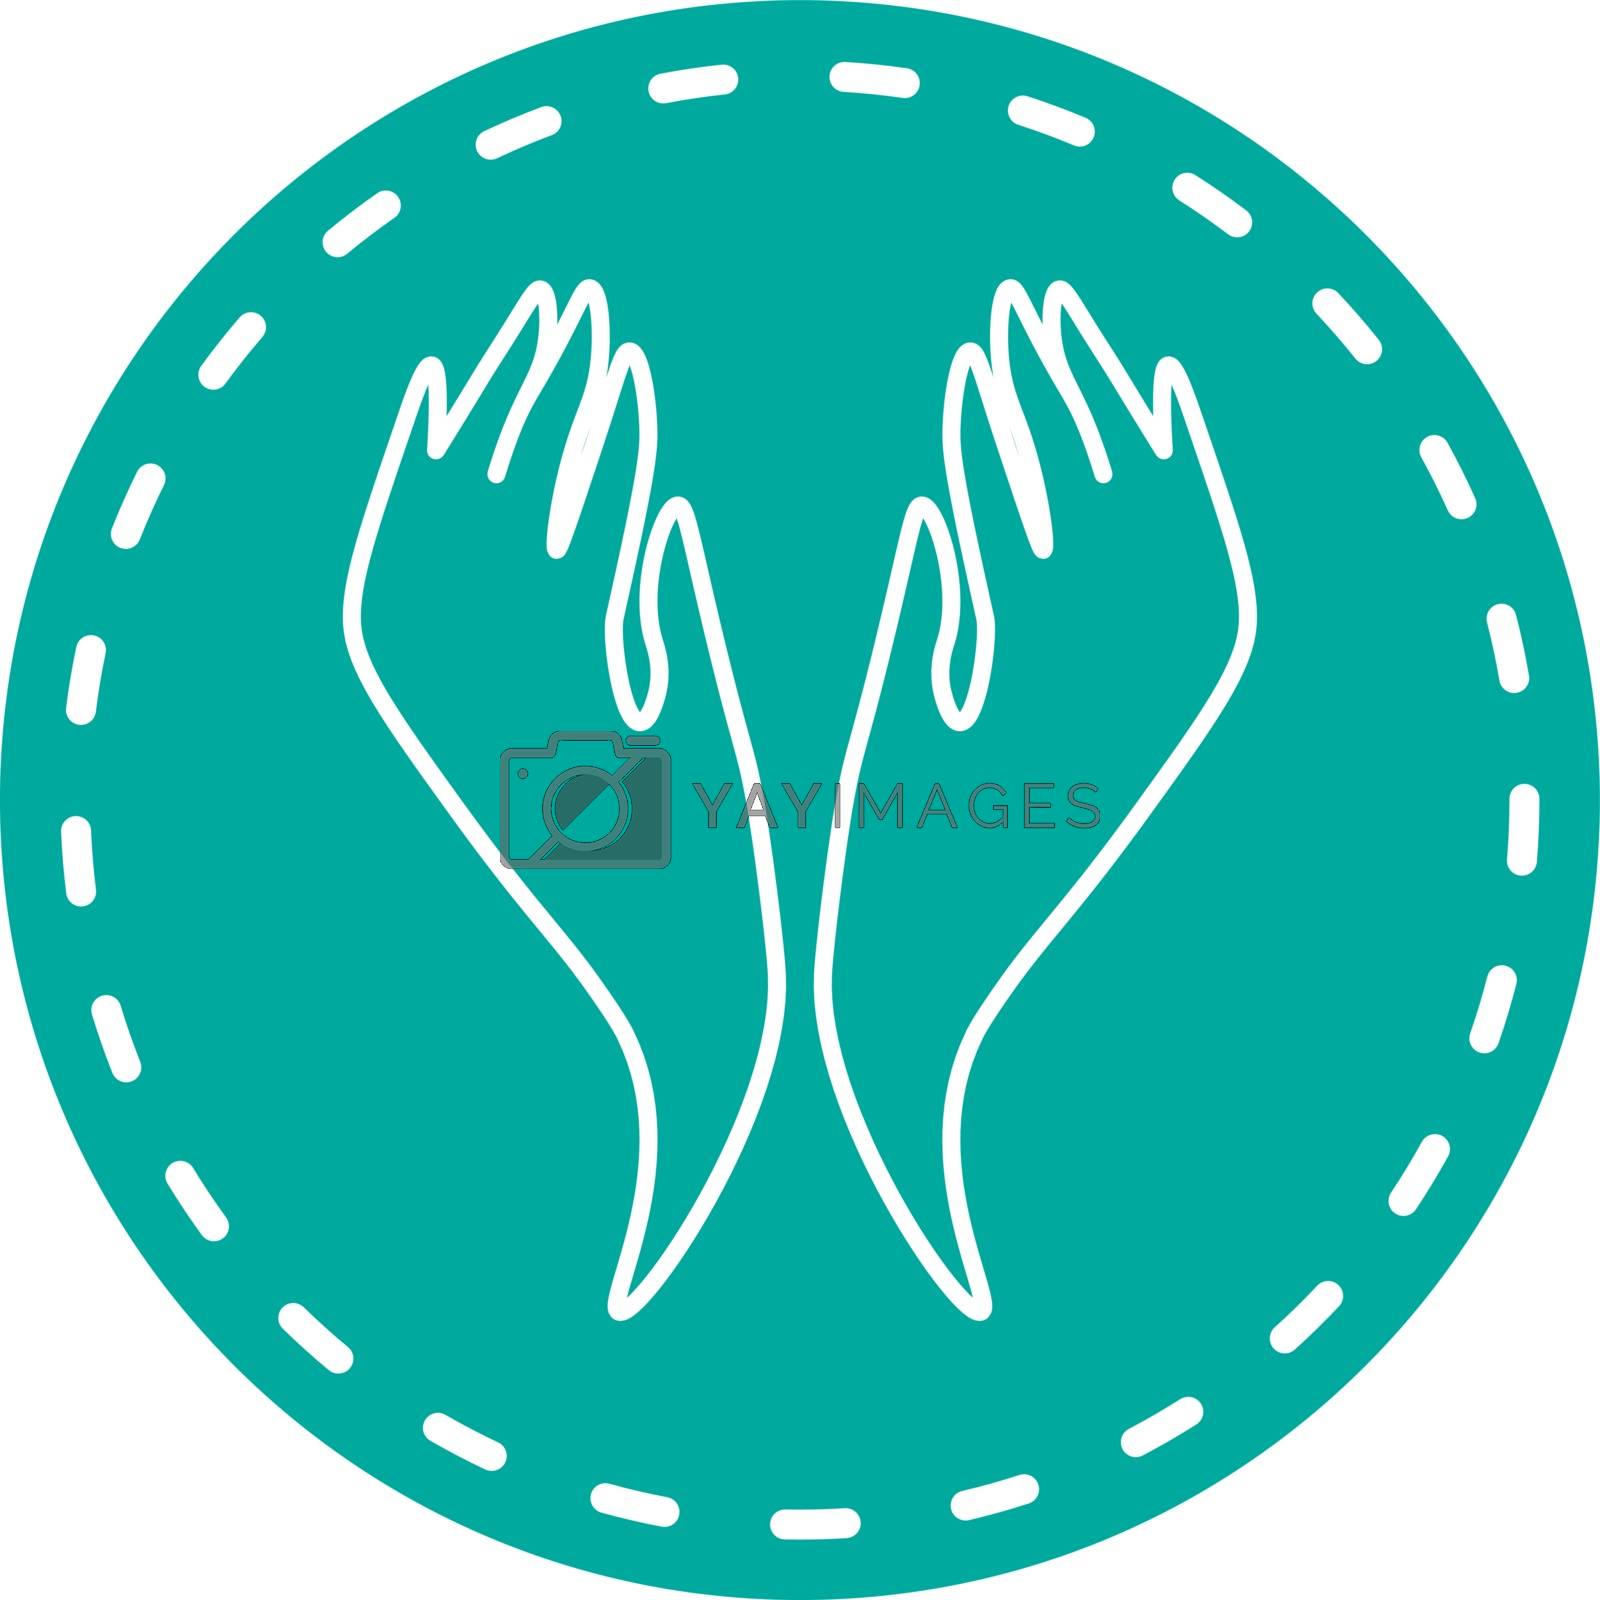 Royalty free image of Turquoise icon with two abstract hands up by paranoido